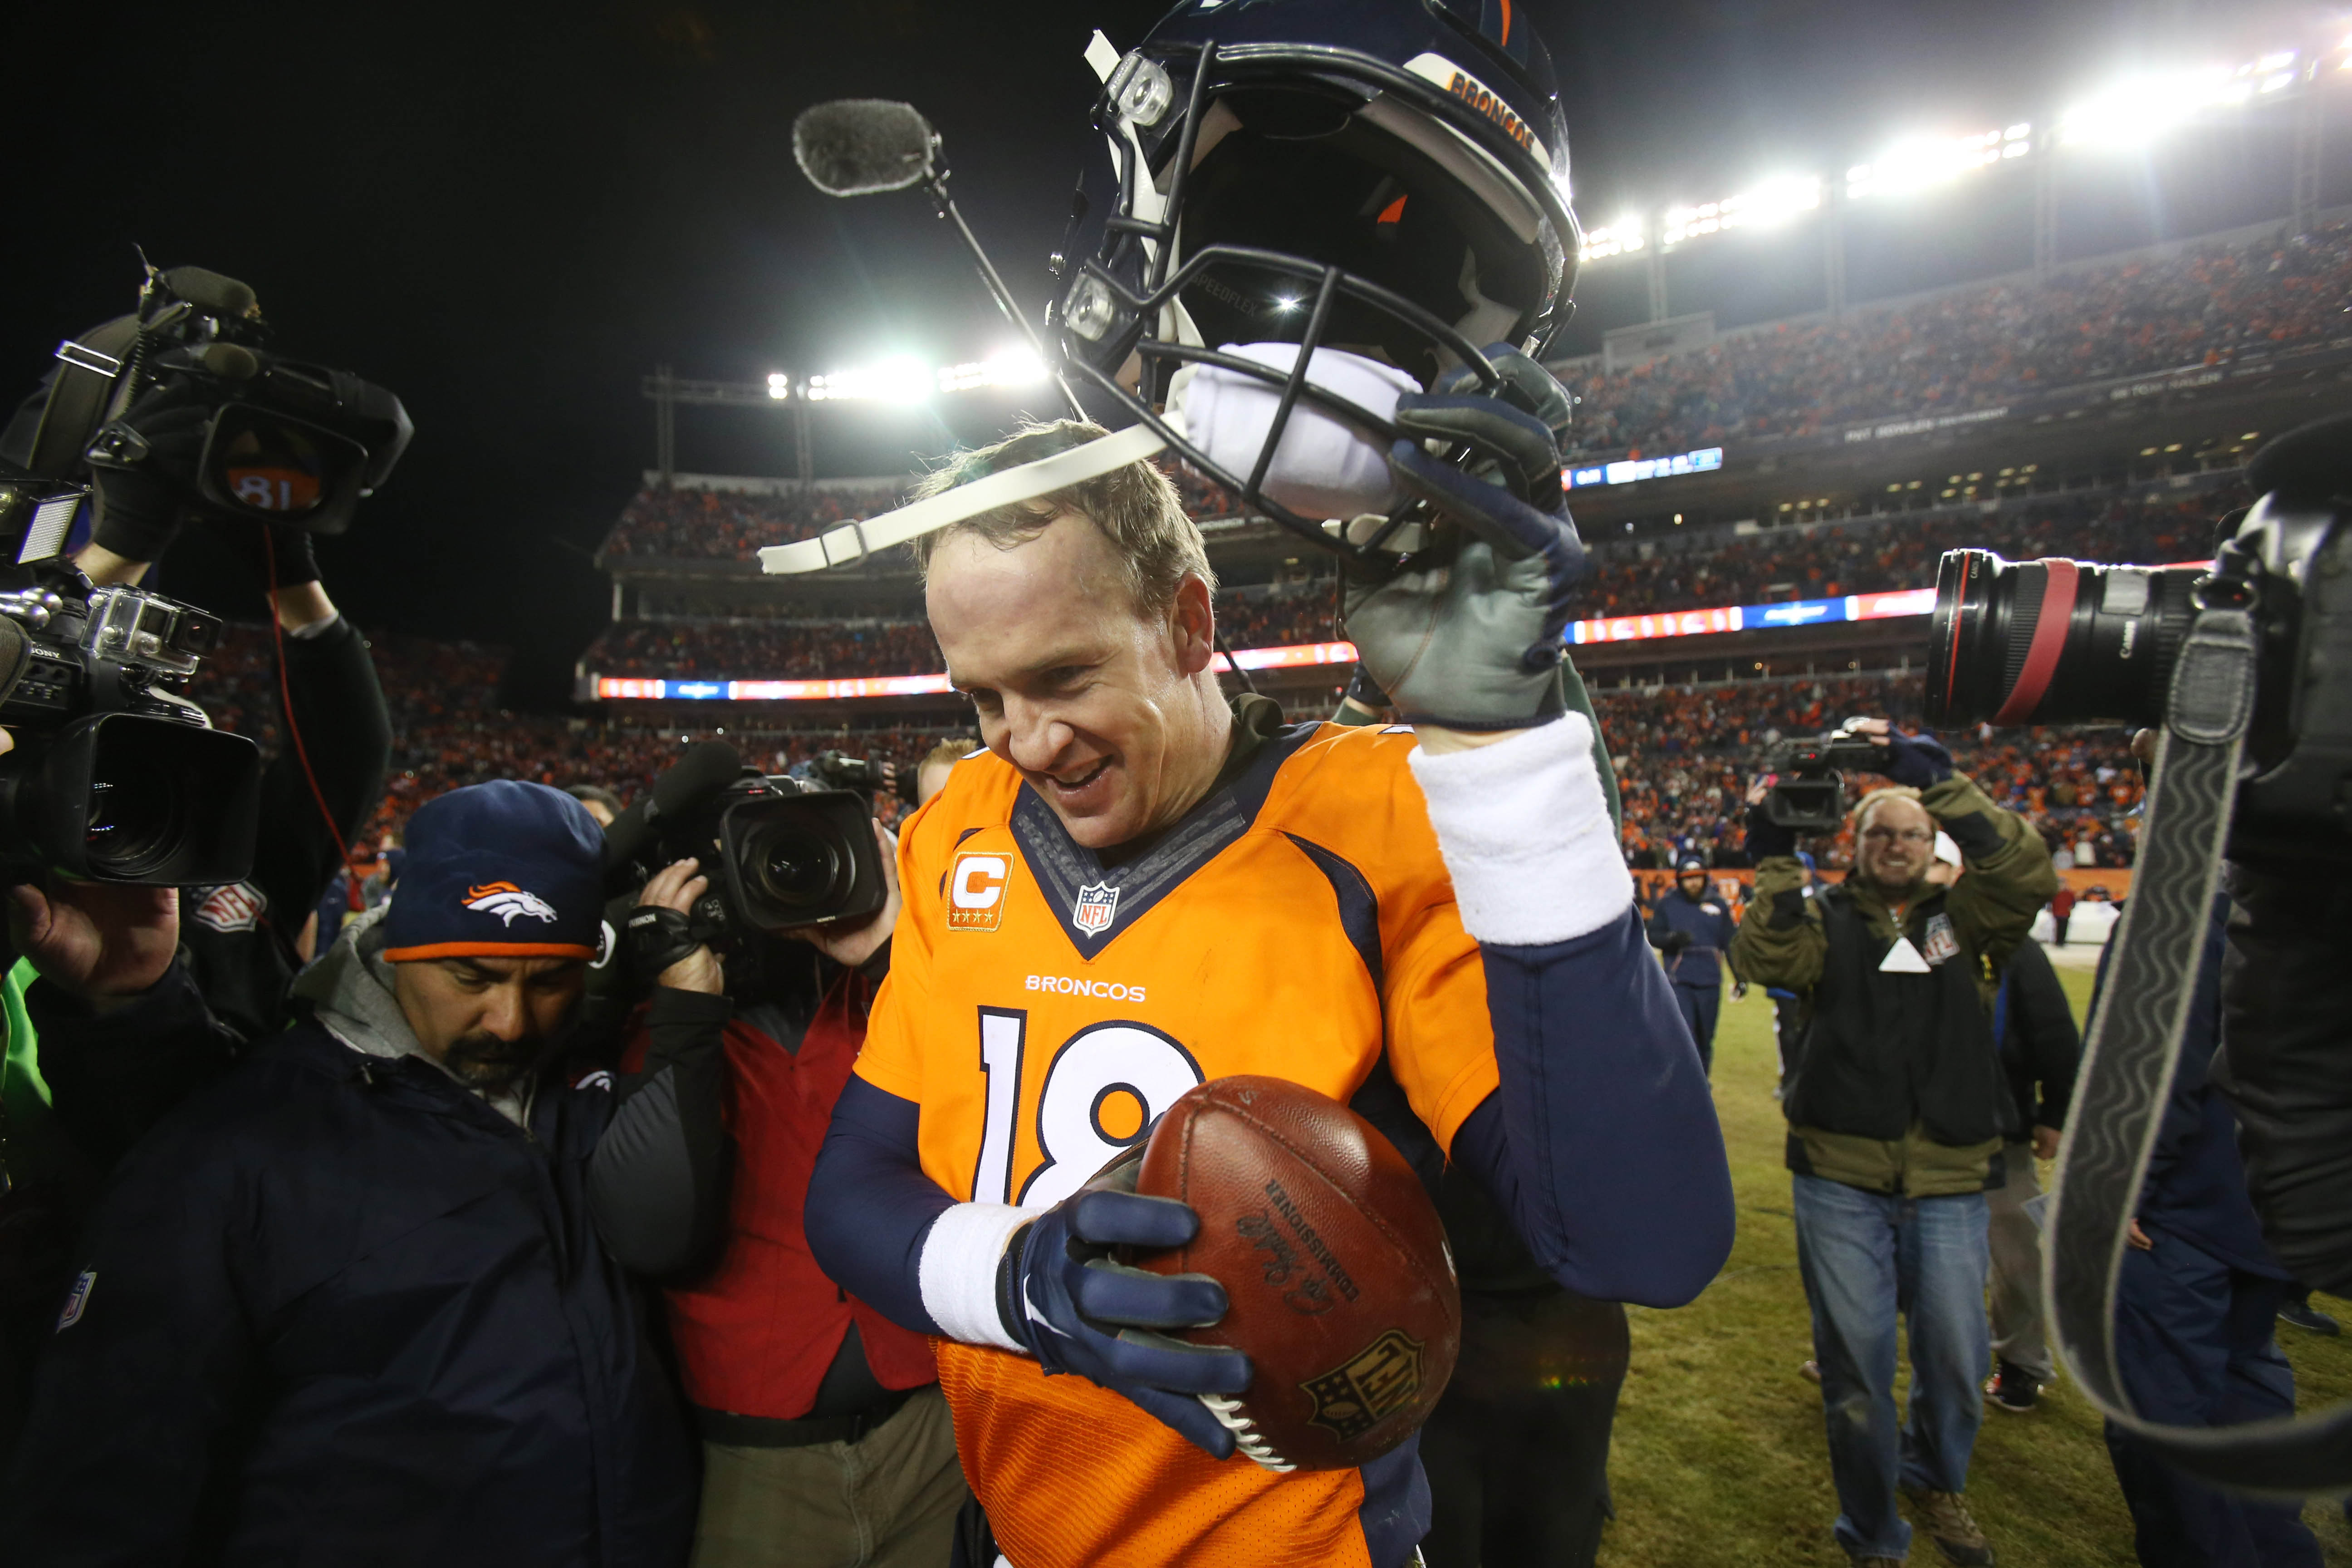 Peyton Manning returns to Broncos, leads them to win over Chargers